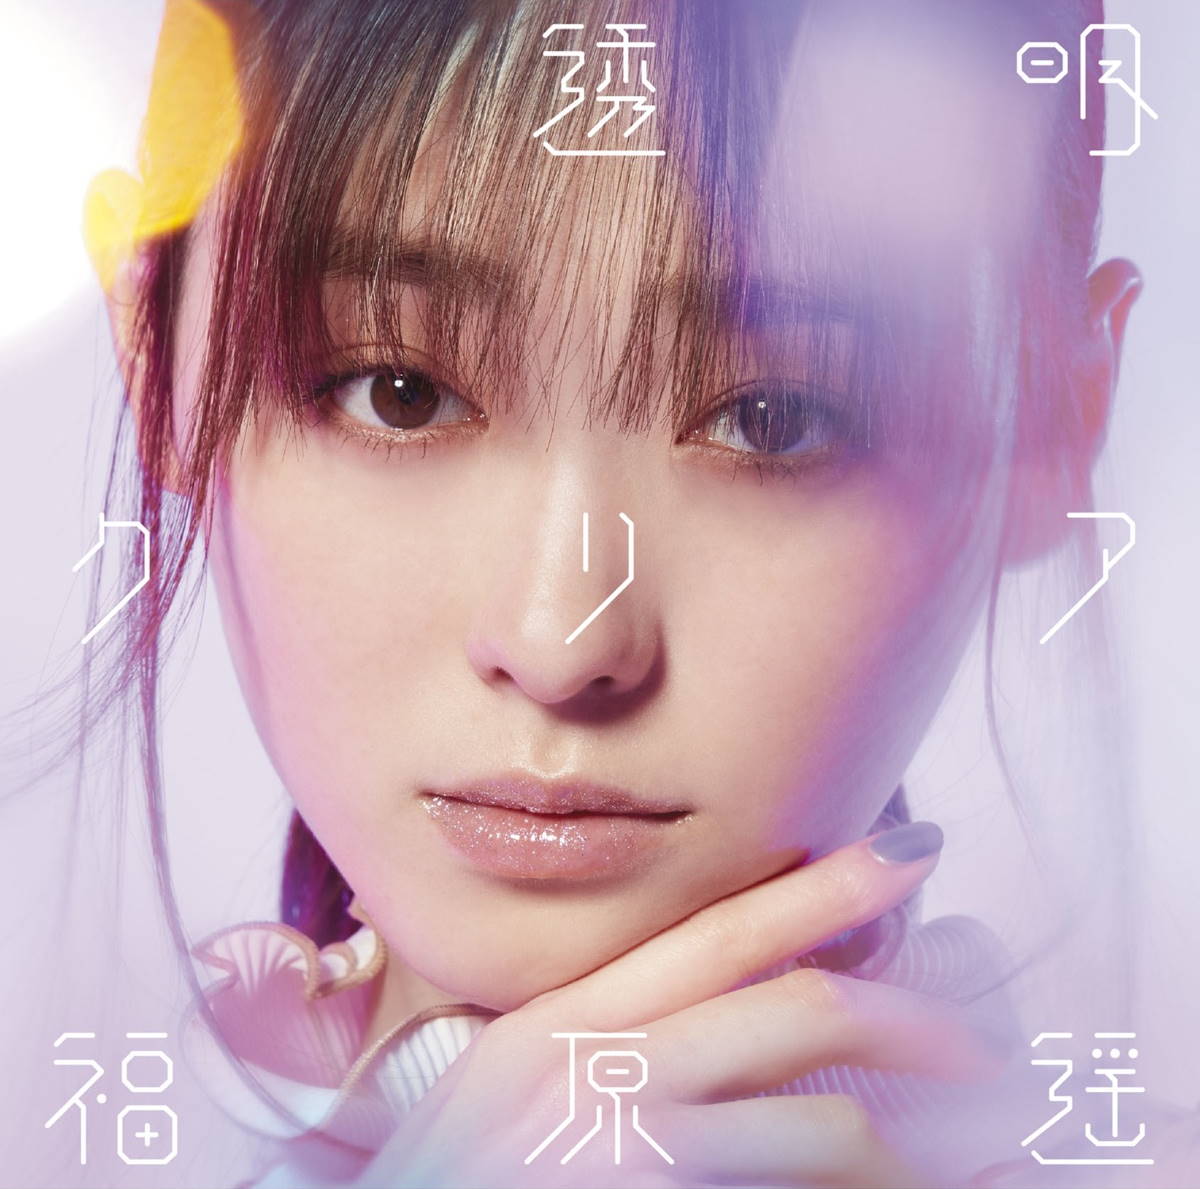 Cover art for『Haruka Fukuhara - Toumei Clear』from the release『Toumei Clear』